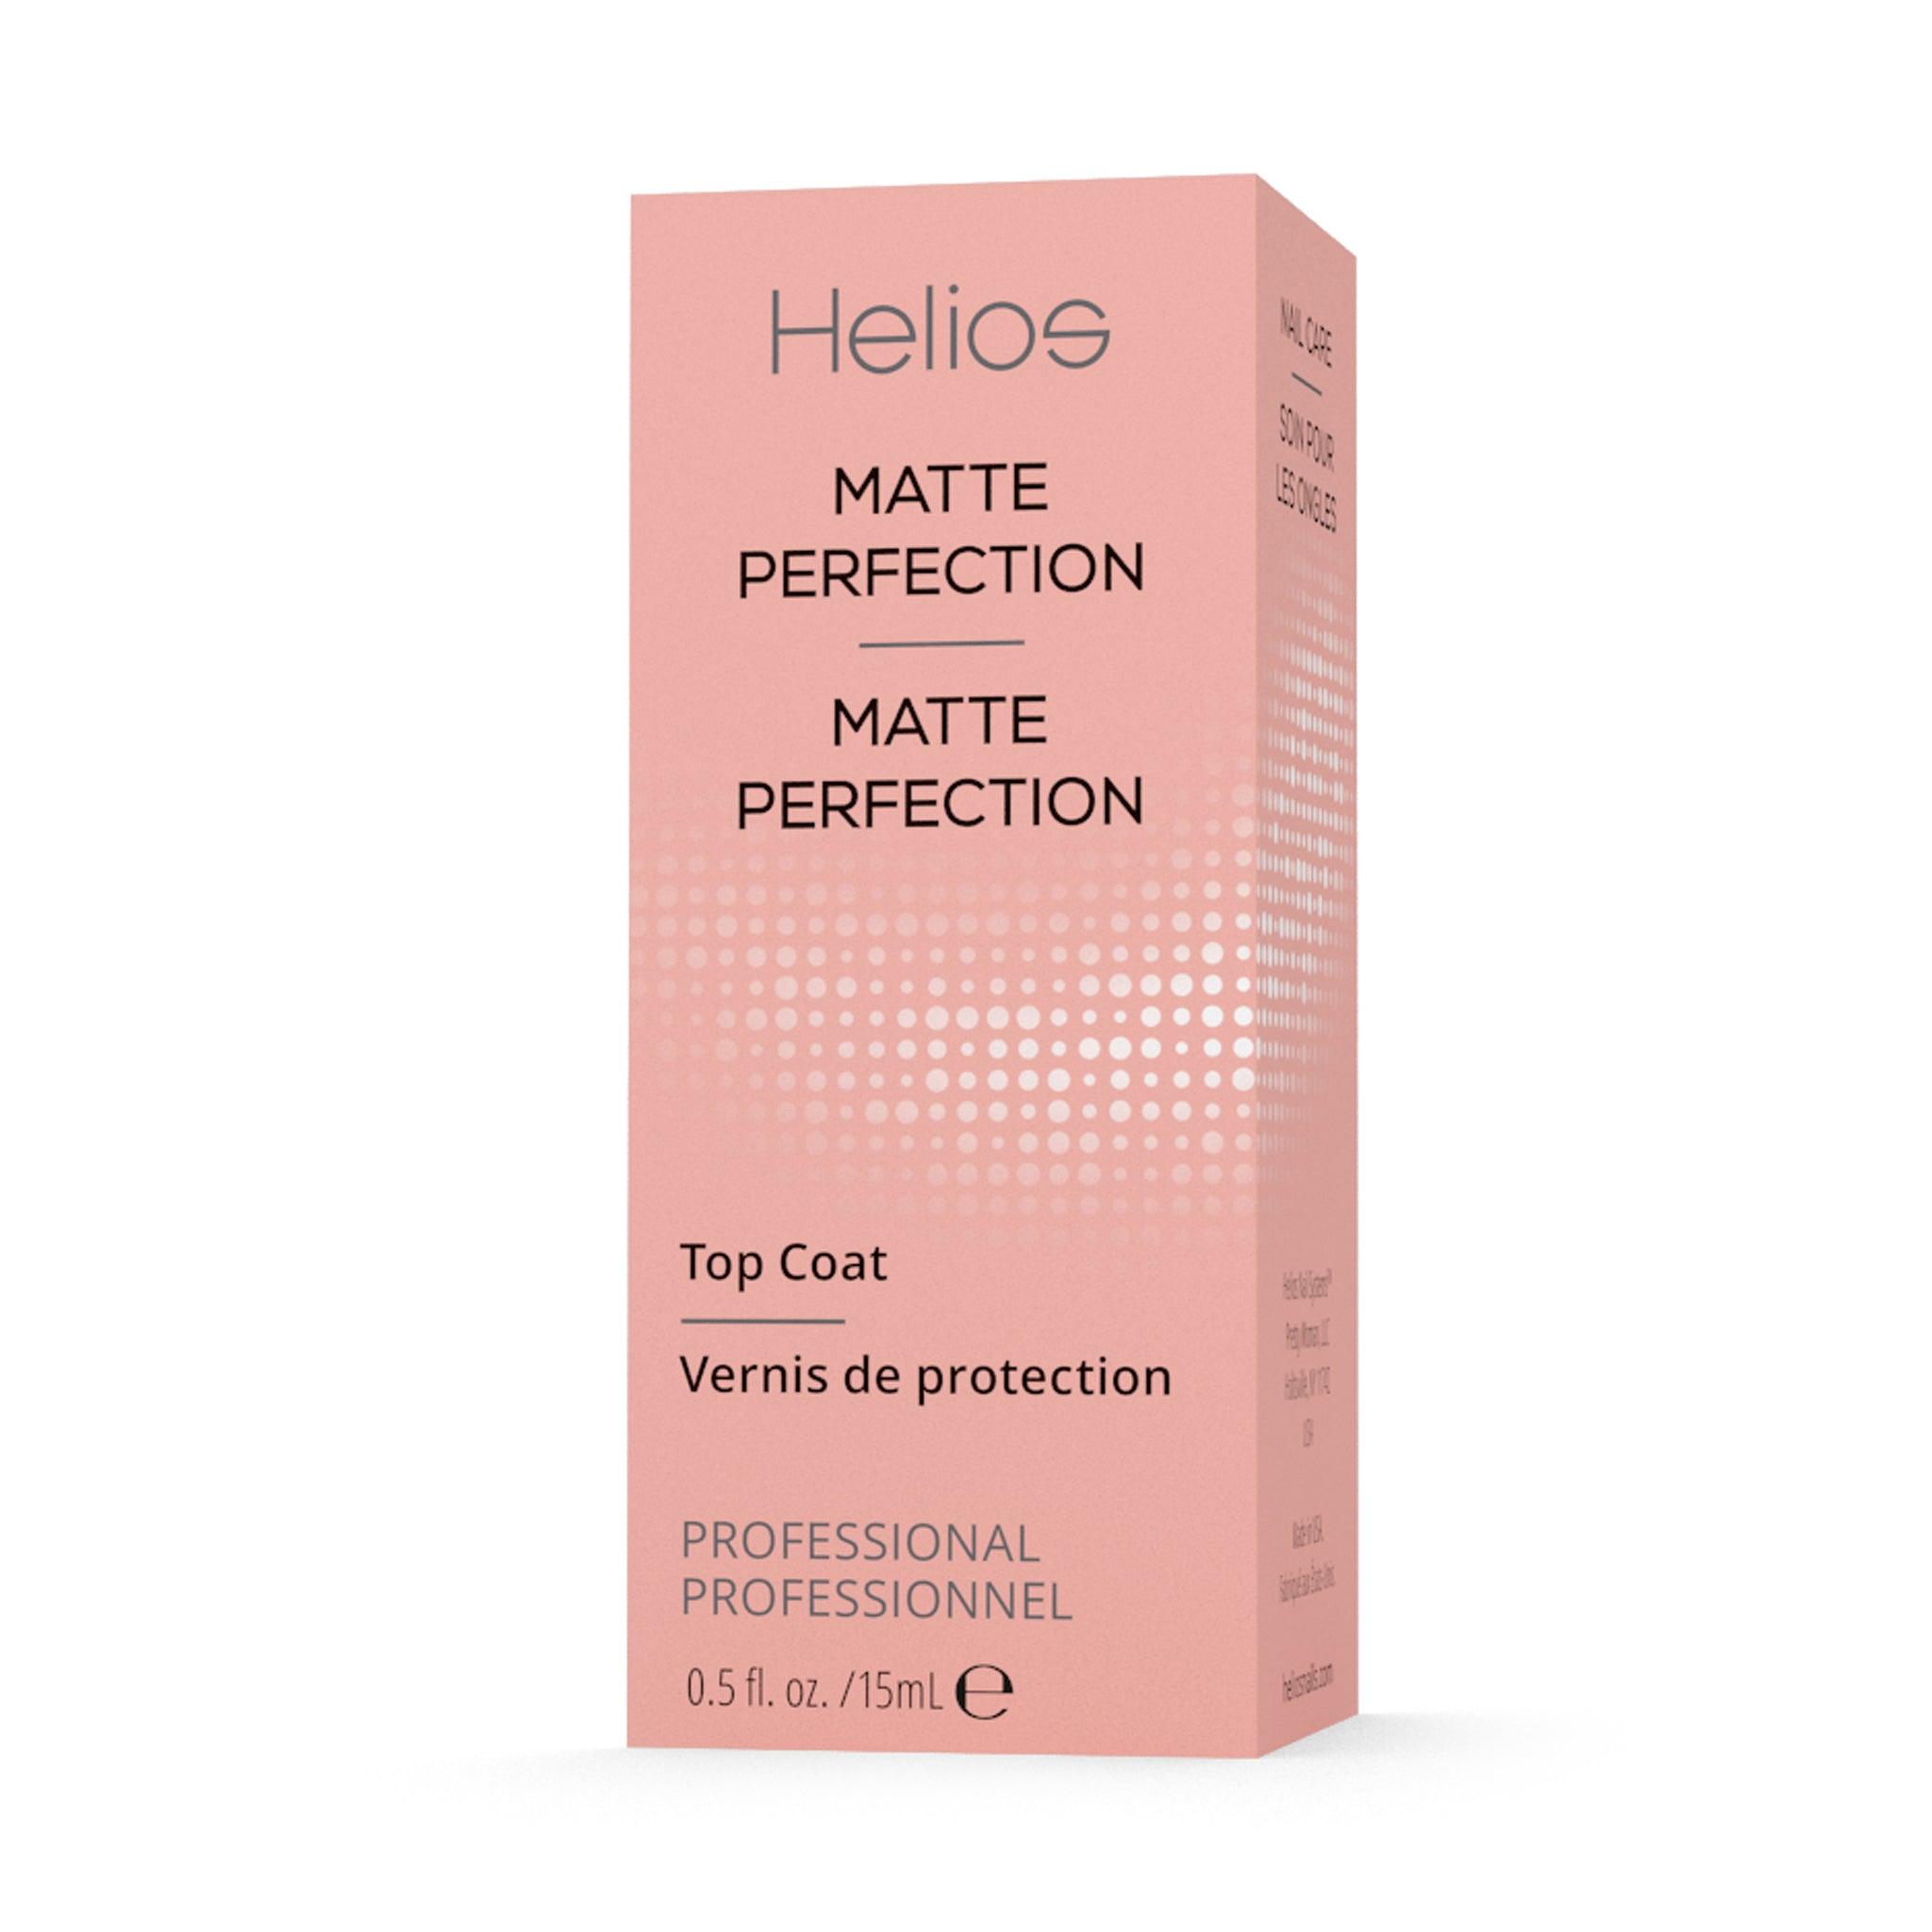 MATTE PERFECTION - TOP COAT - Helios Nail Systems